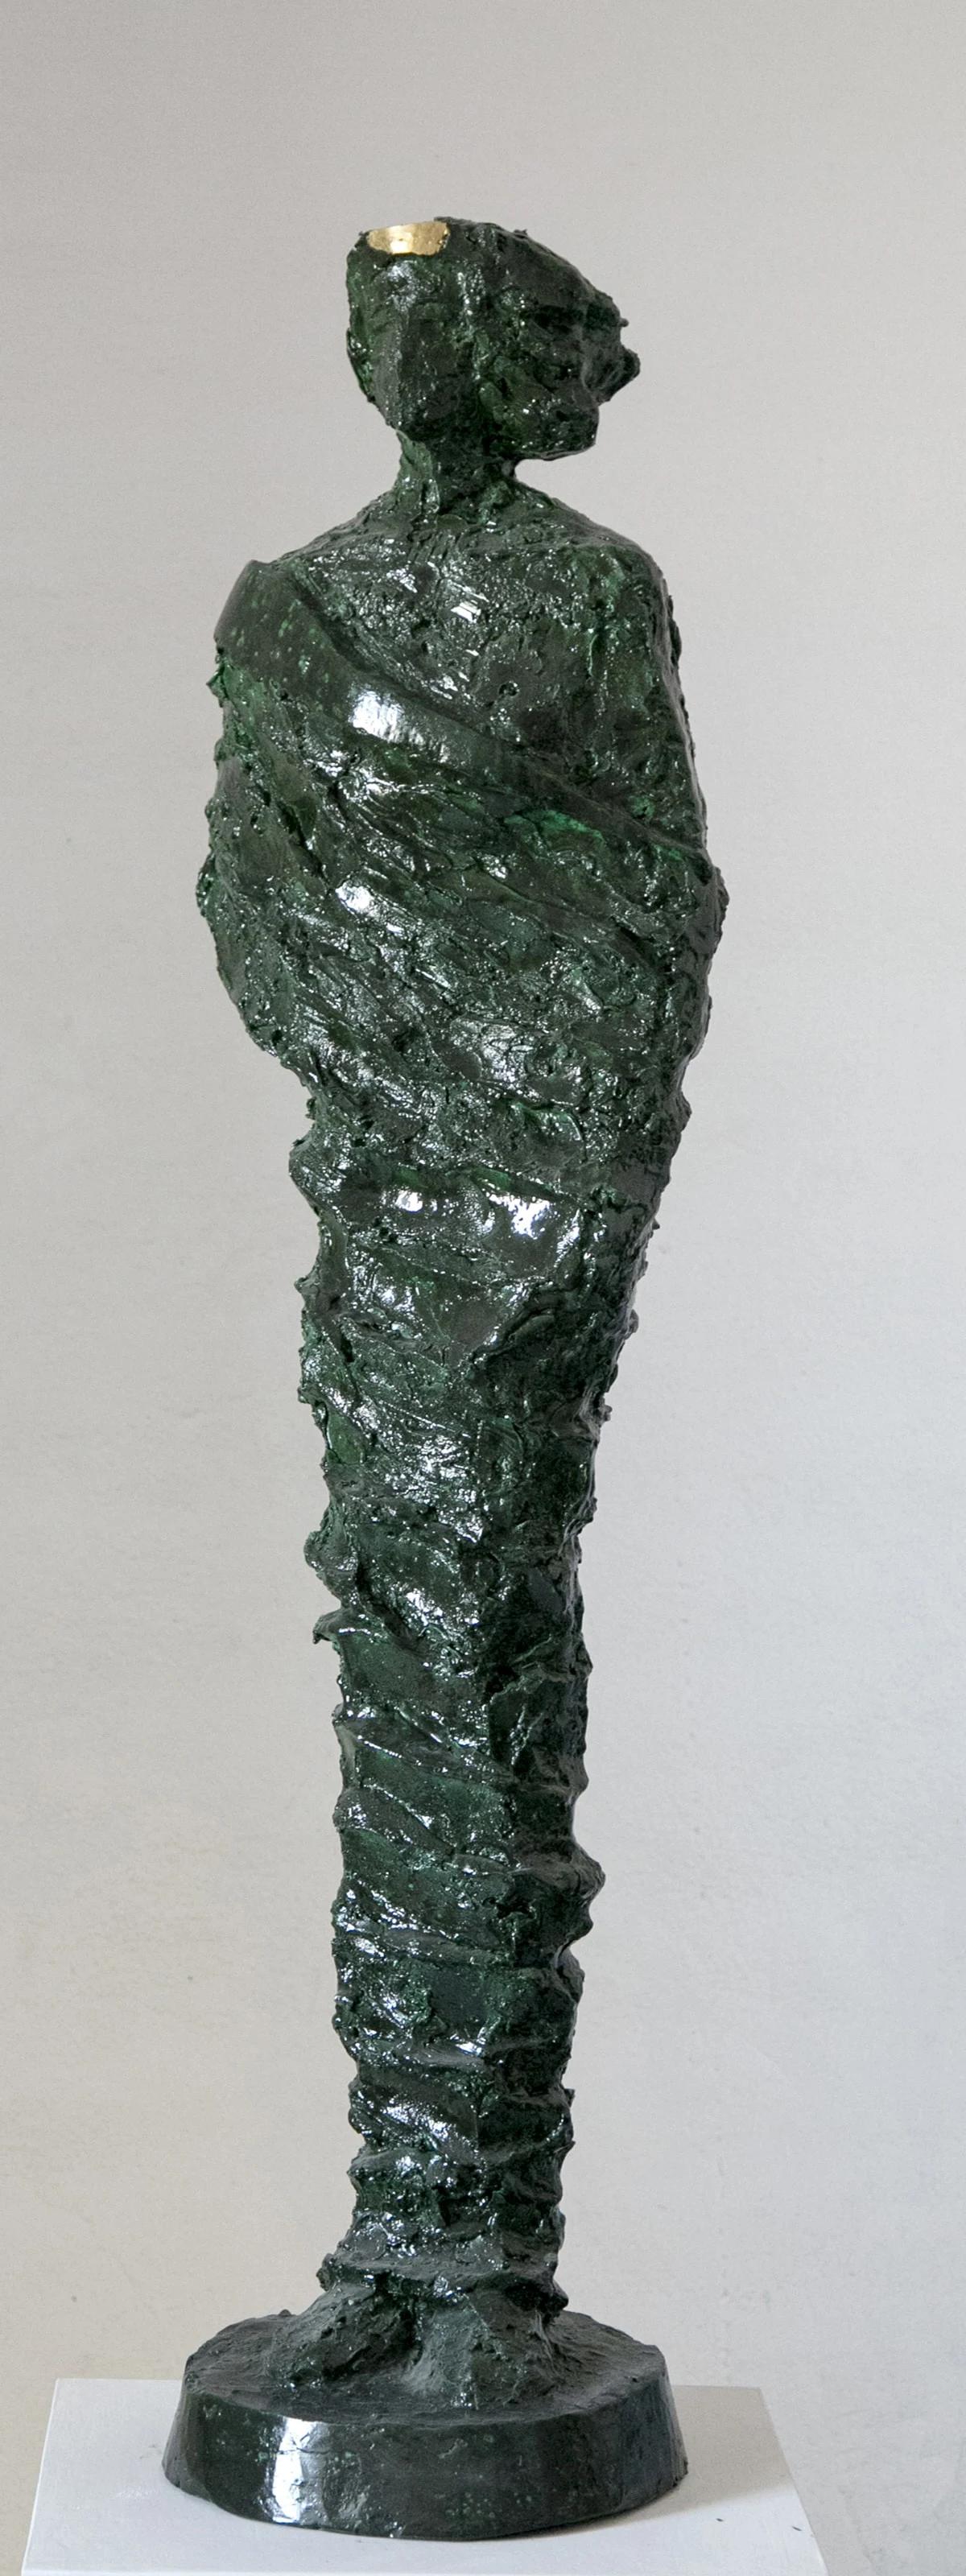 "Mannequine I" Sculpture 42" x 11" x 5" inch by Sarkis Tossonian

Sarkis Tossoonian was born in Alexandria in 1953. He graduated from the Faculty of Fine Arts/Sculpture in 1979. He started exhibiting in individual and group exhibitions in Alexandria